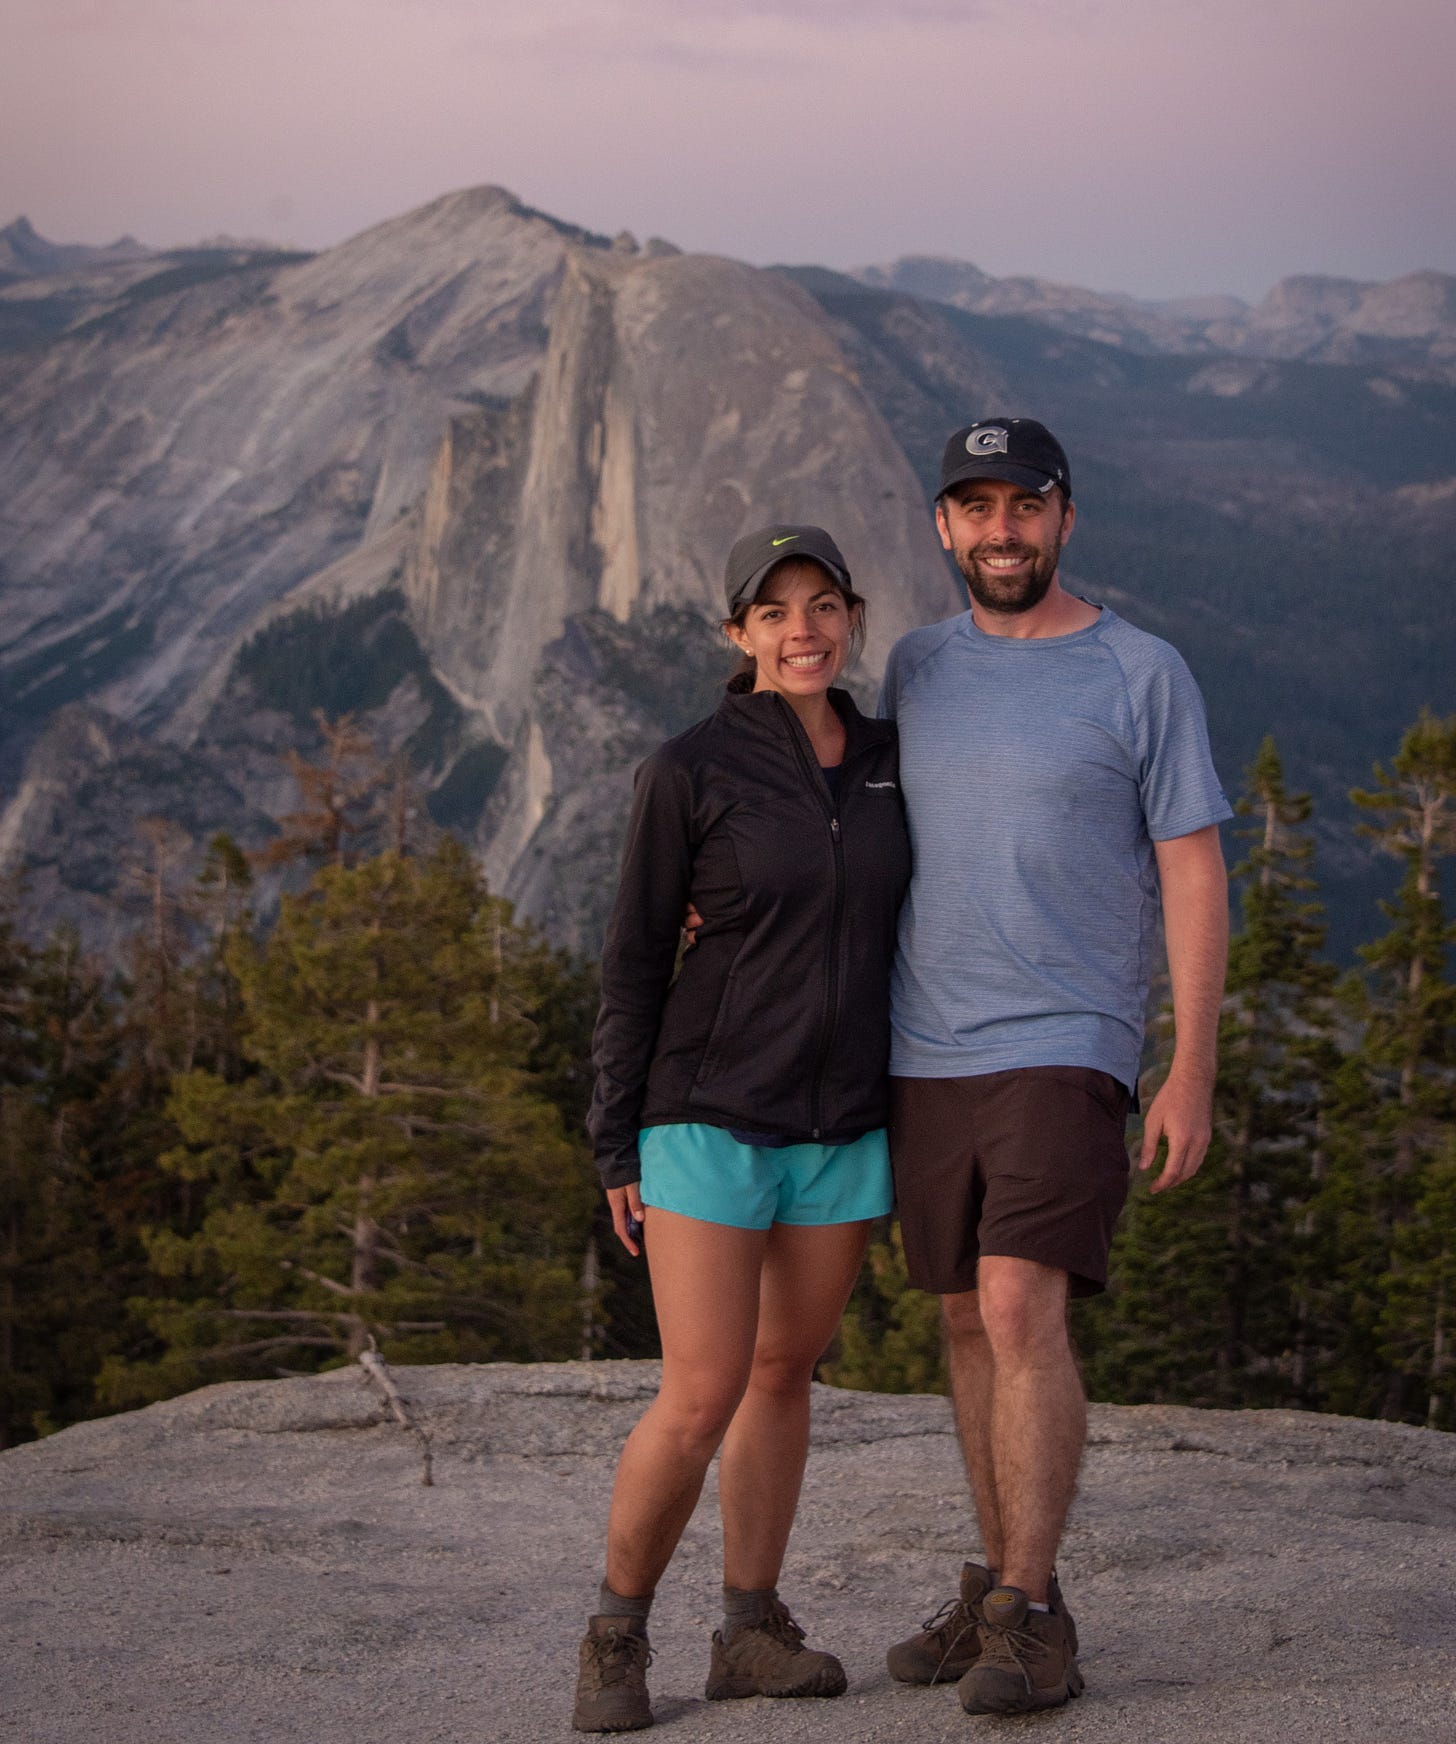 Jeff and fiancee hiking, travel mentors